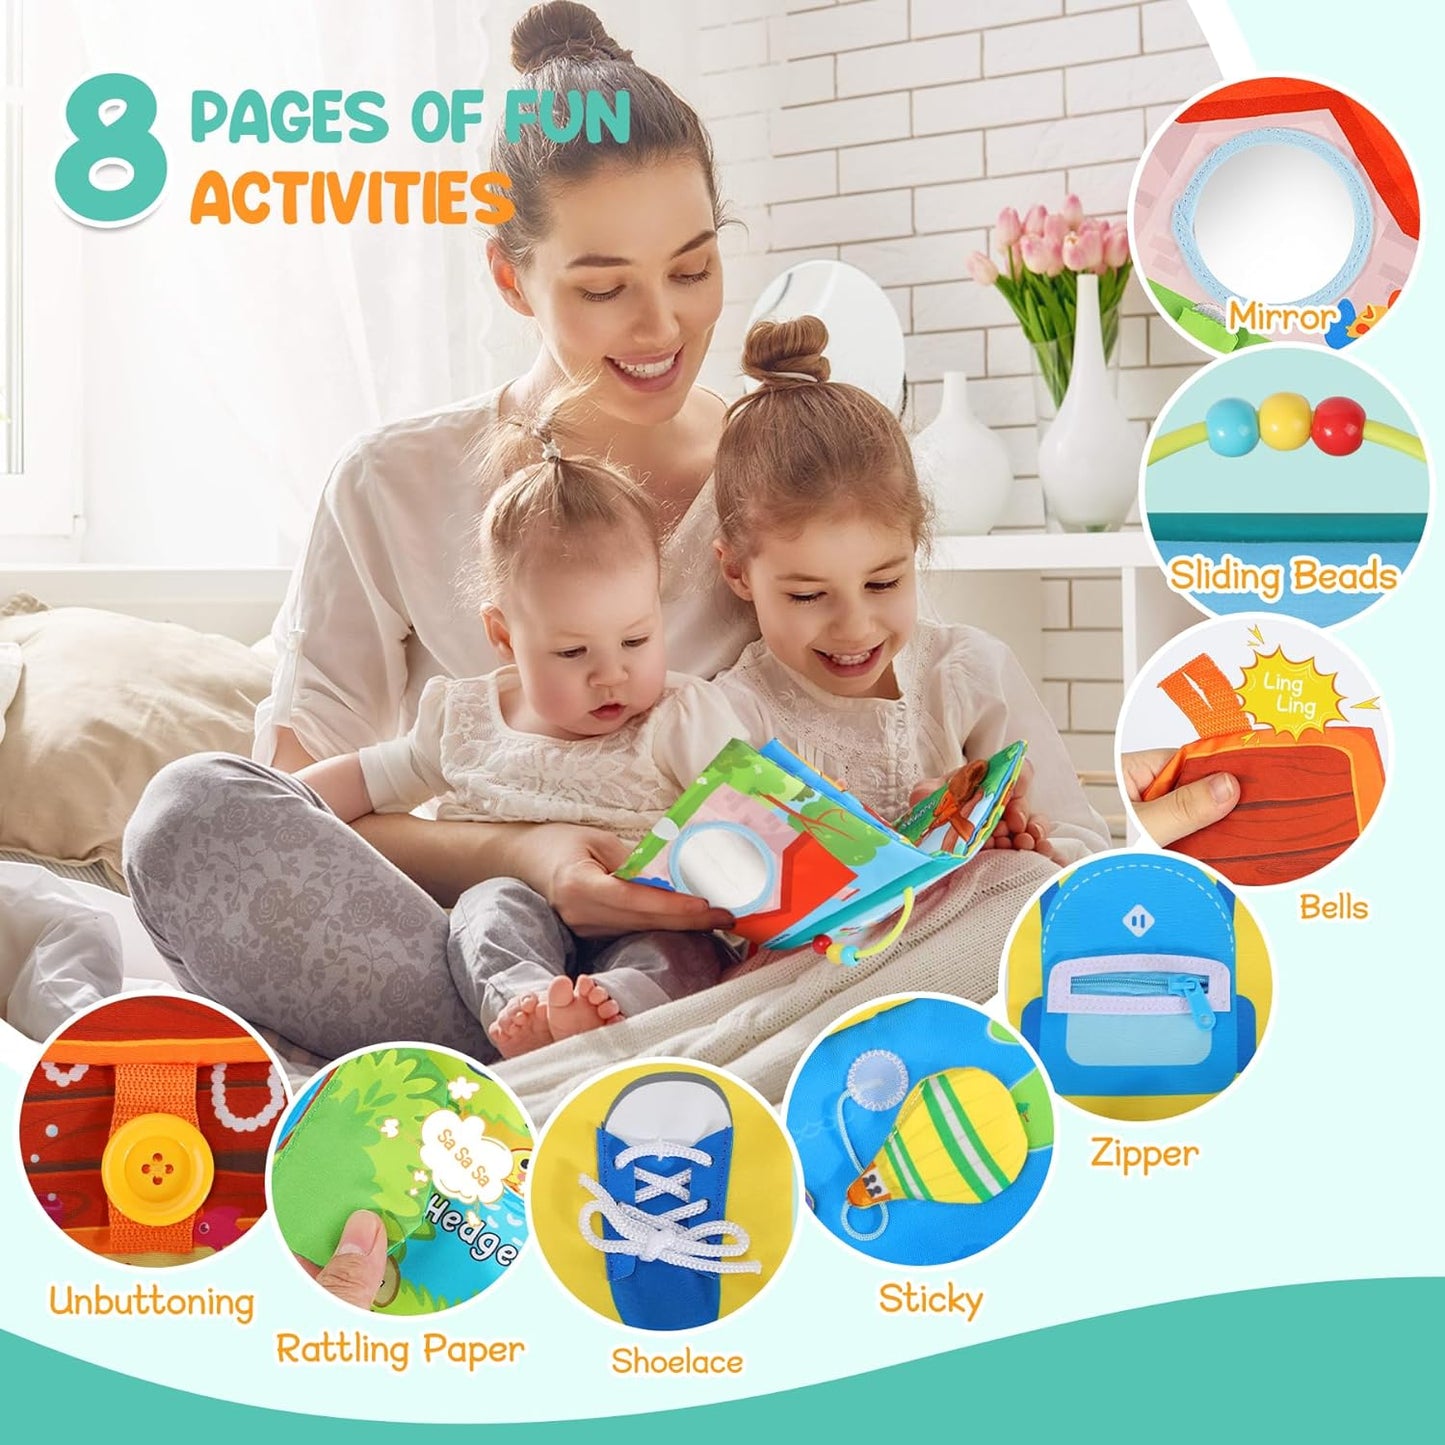 Baby Books Toys 0-18 Months, Montessori Toys for Infant Newborn Activity Soft Book with Mirror Squeaky Sounds, 8-Page Early Development Travel Toys Birthdays Gifts for Toddler Motor Skills